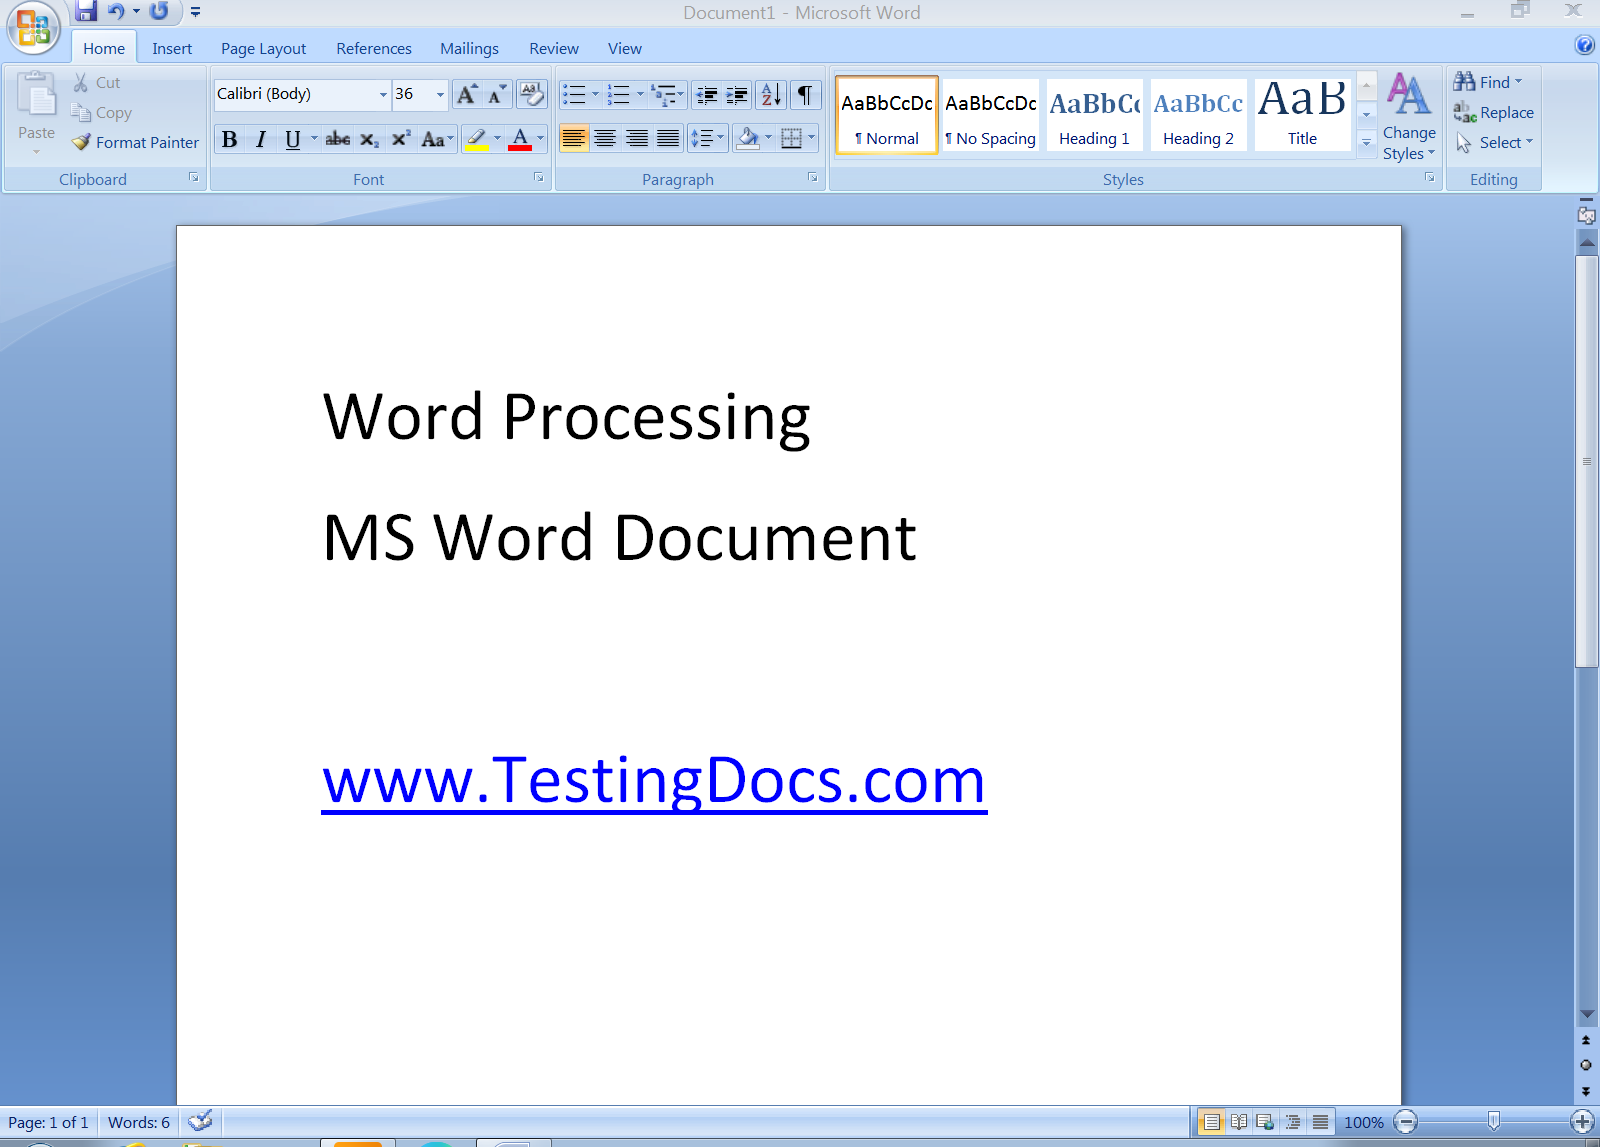 MS_Word_Document Application Software